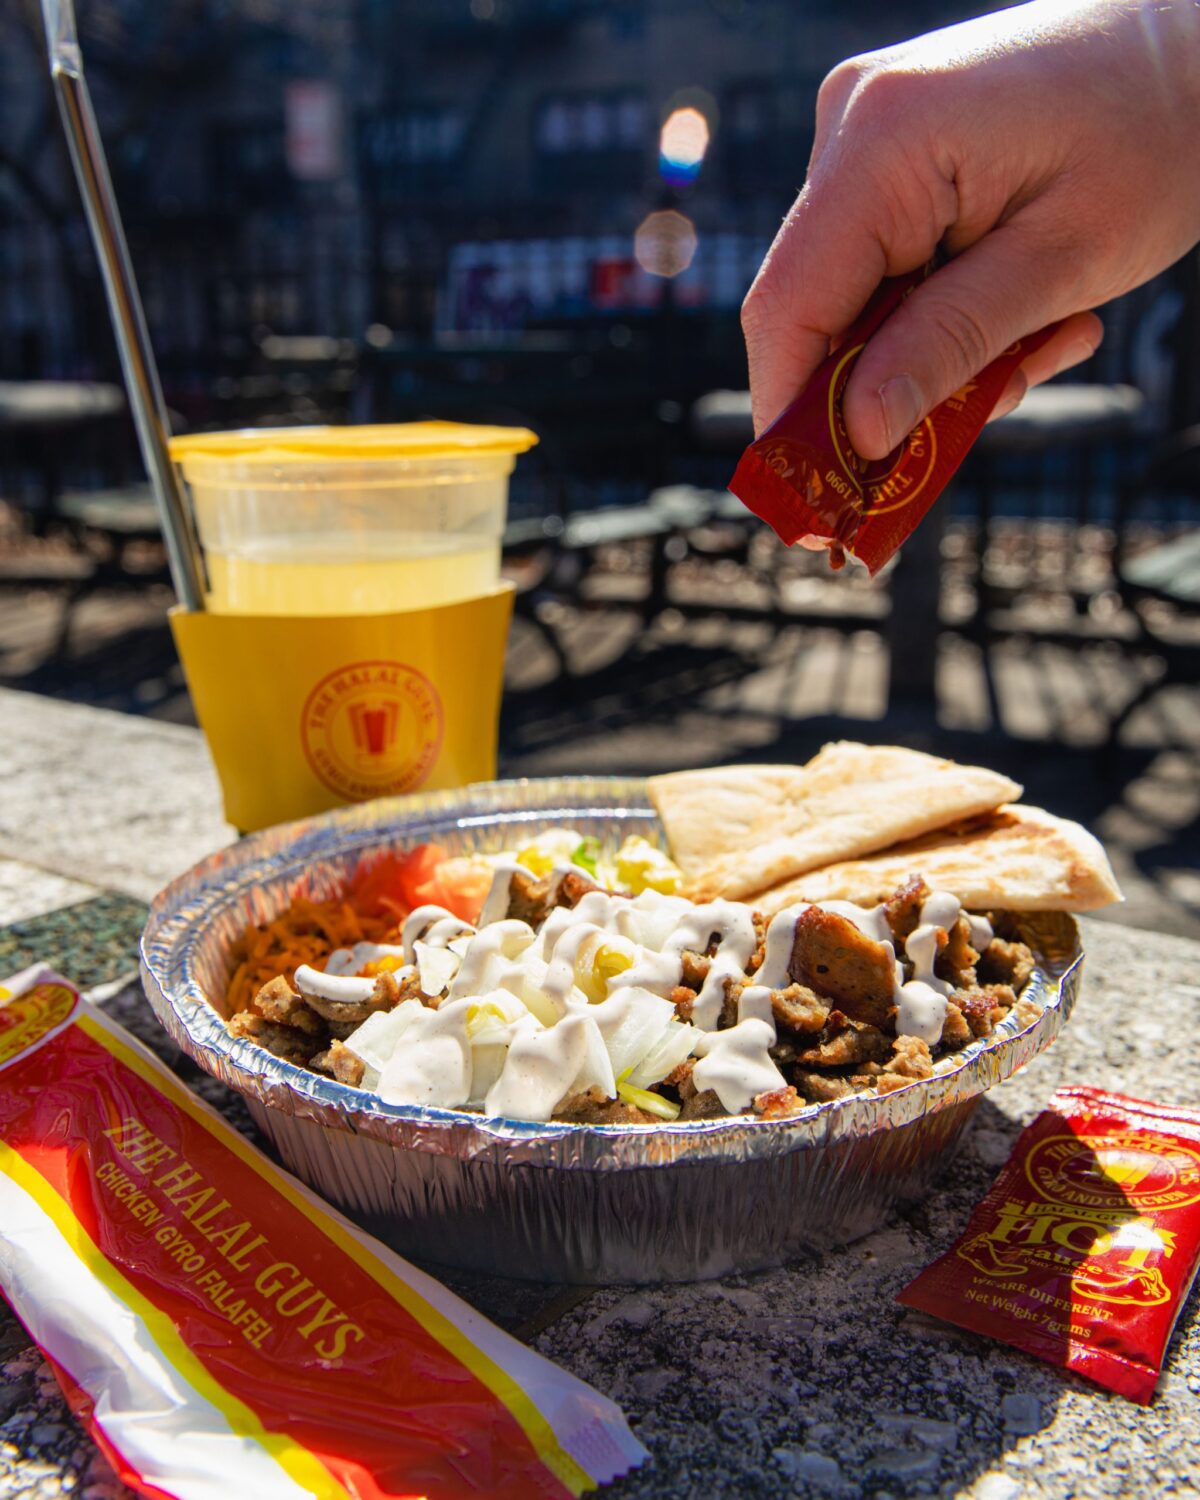 The Halal Guys Franchise is Expanding in Omaha and Lincoln Nebraska